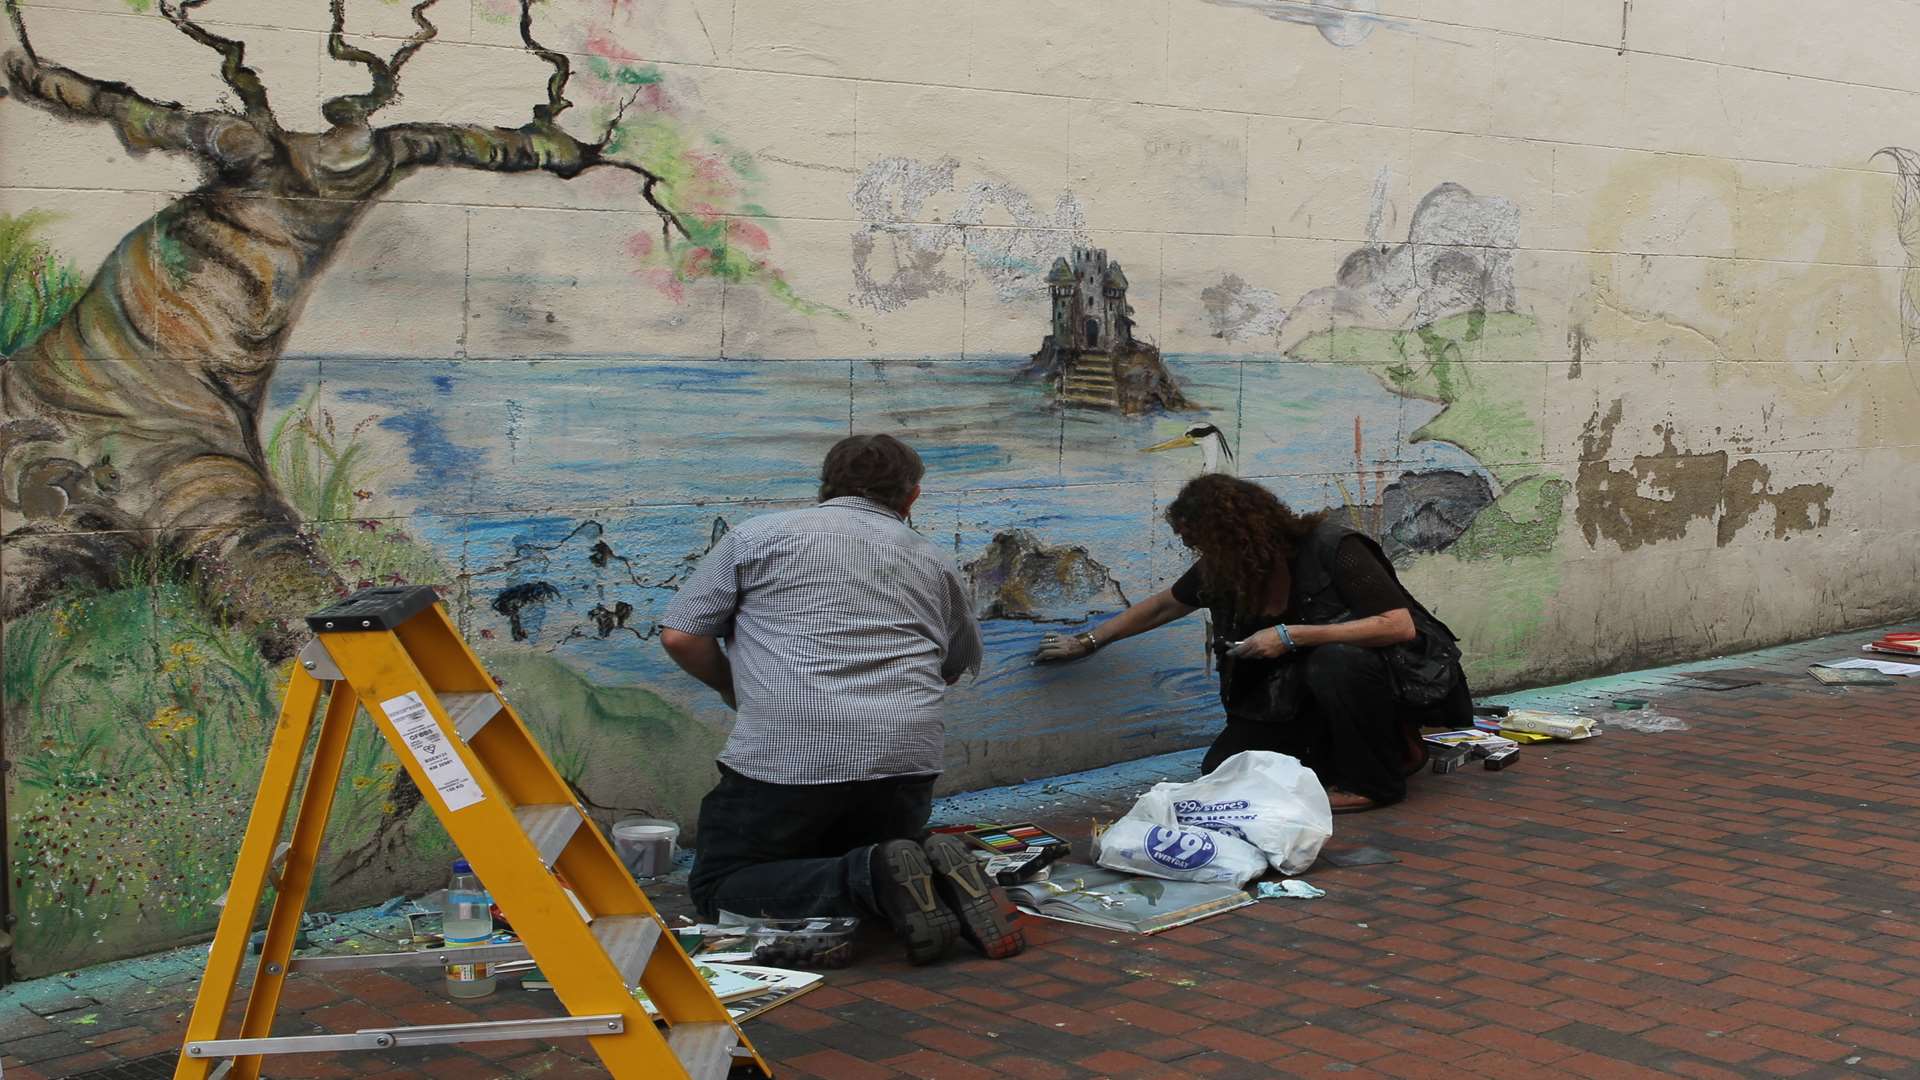 Artists will draw on the walls of Sittingbourne High Street as part of the Chalk It Up art festival